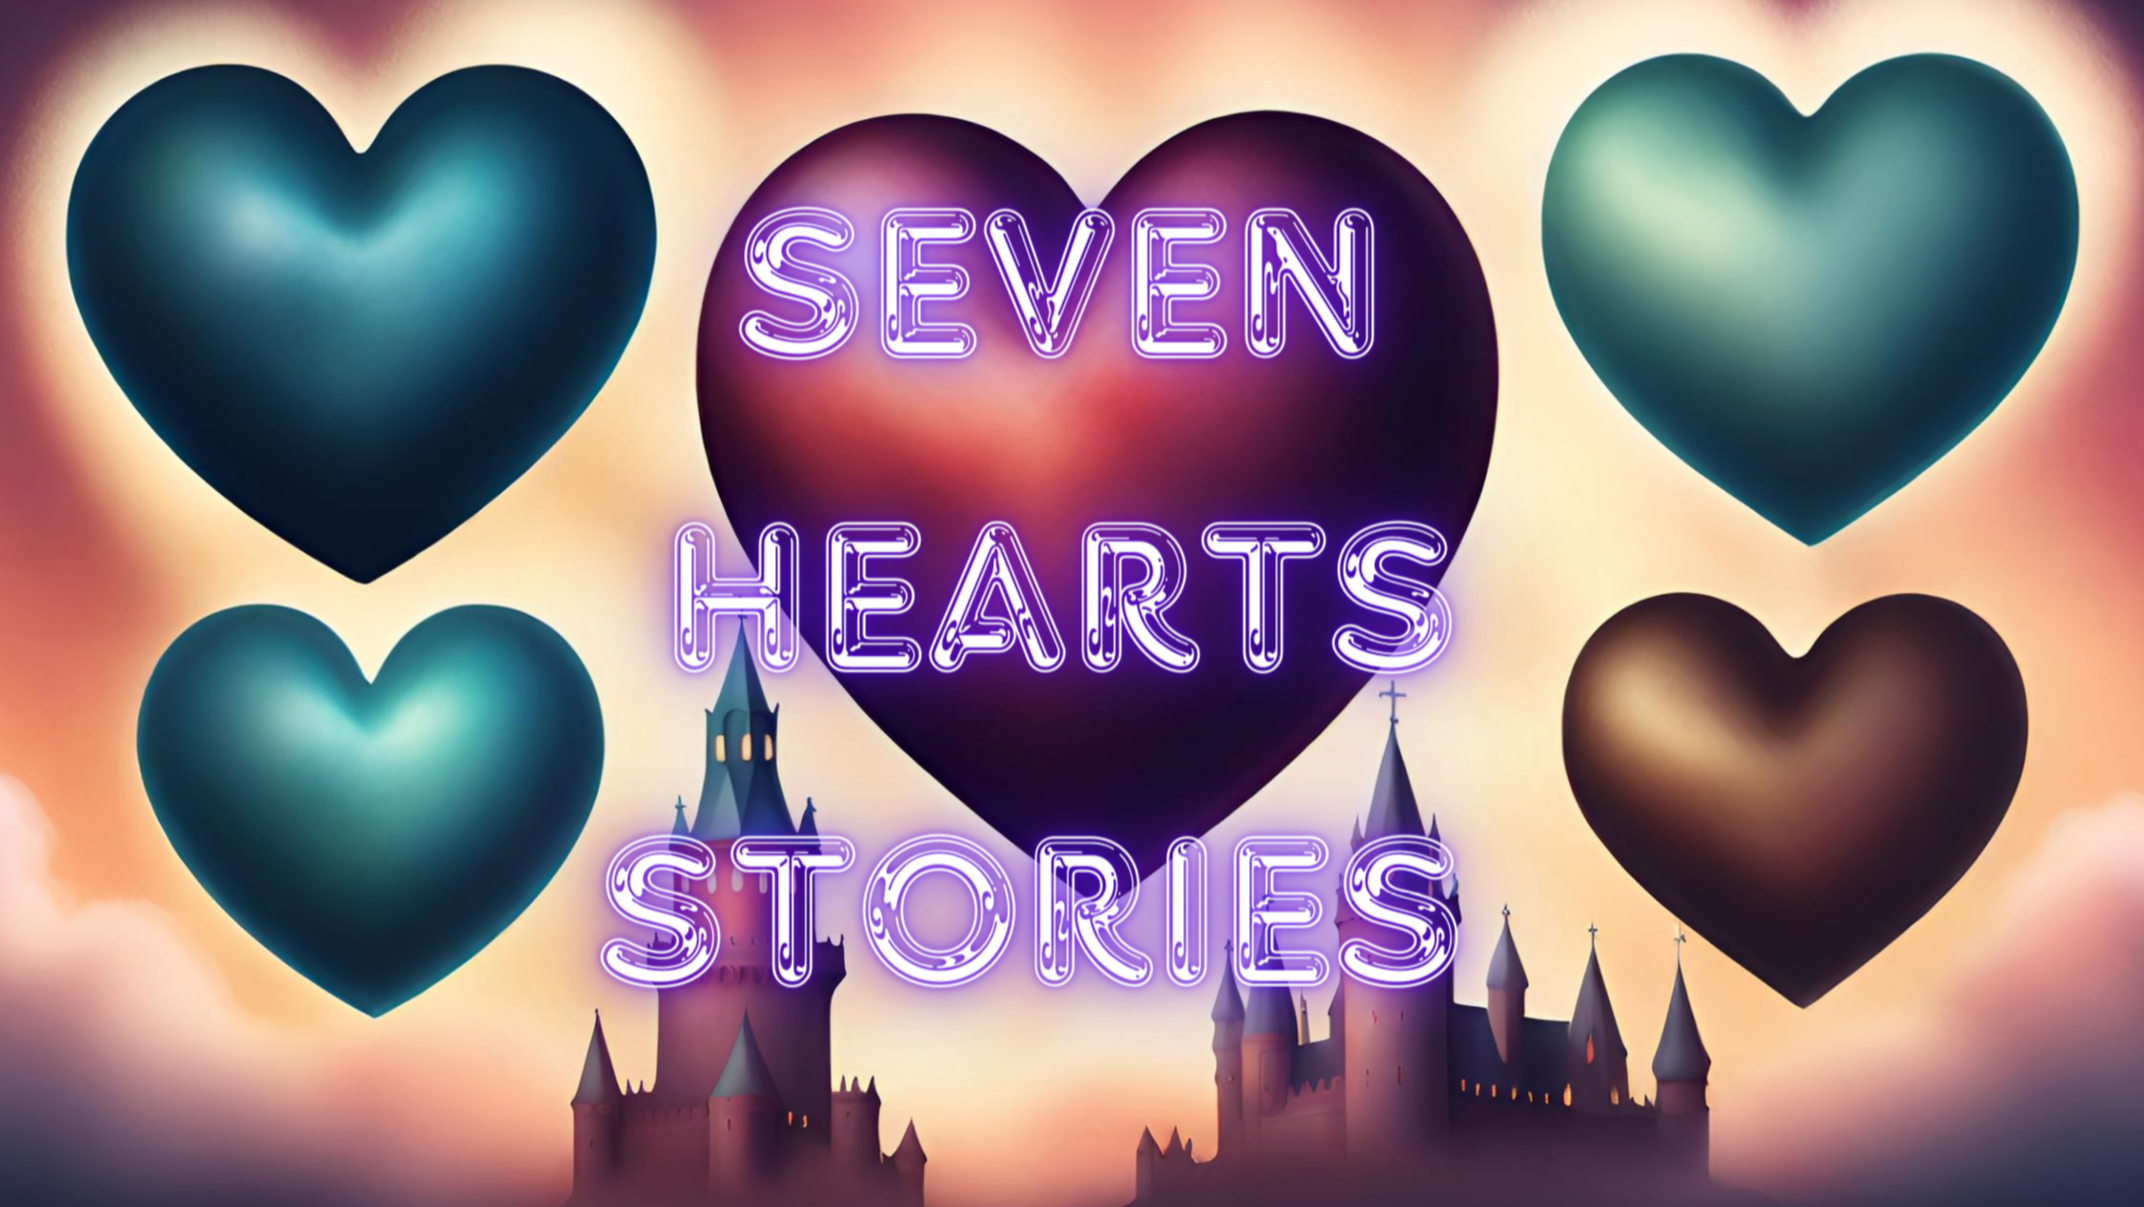 Seven Hearts stories. Seven Hearts stories сердца. Seven Hearts stories гайд сердце Атлантиды. Seven Hearts stories сердце Атланта.